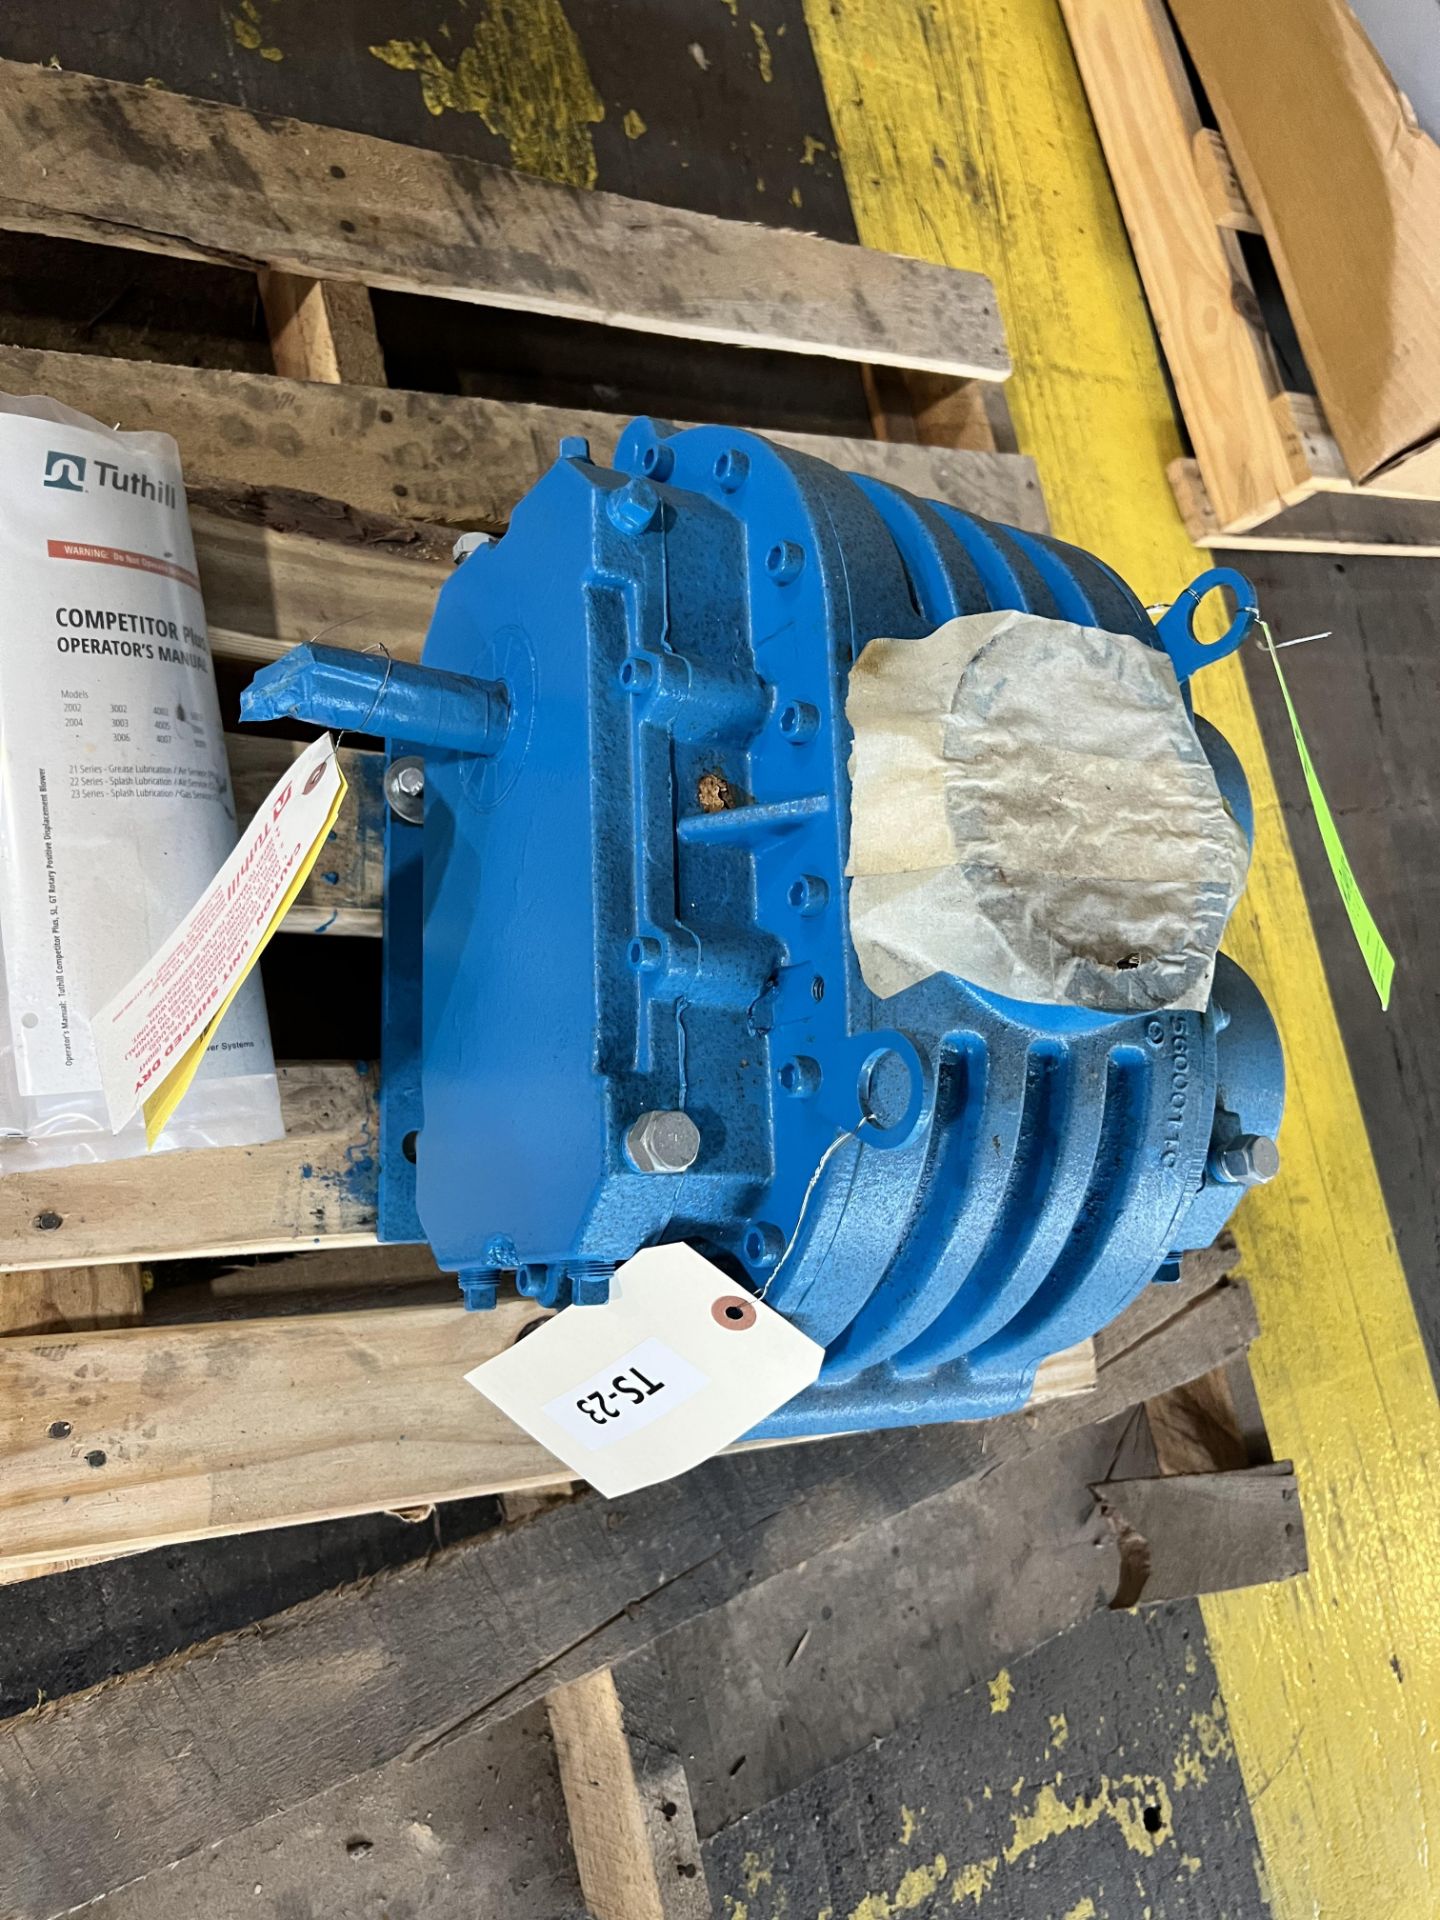 NEW 2016 TUTHILL ROTARY POSITIVE DISPLACEMENT BLOWER PUMP HEAD, MODEL 5006-22L 3N, S/N 3366161602, - Image 2 of 9